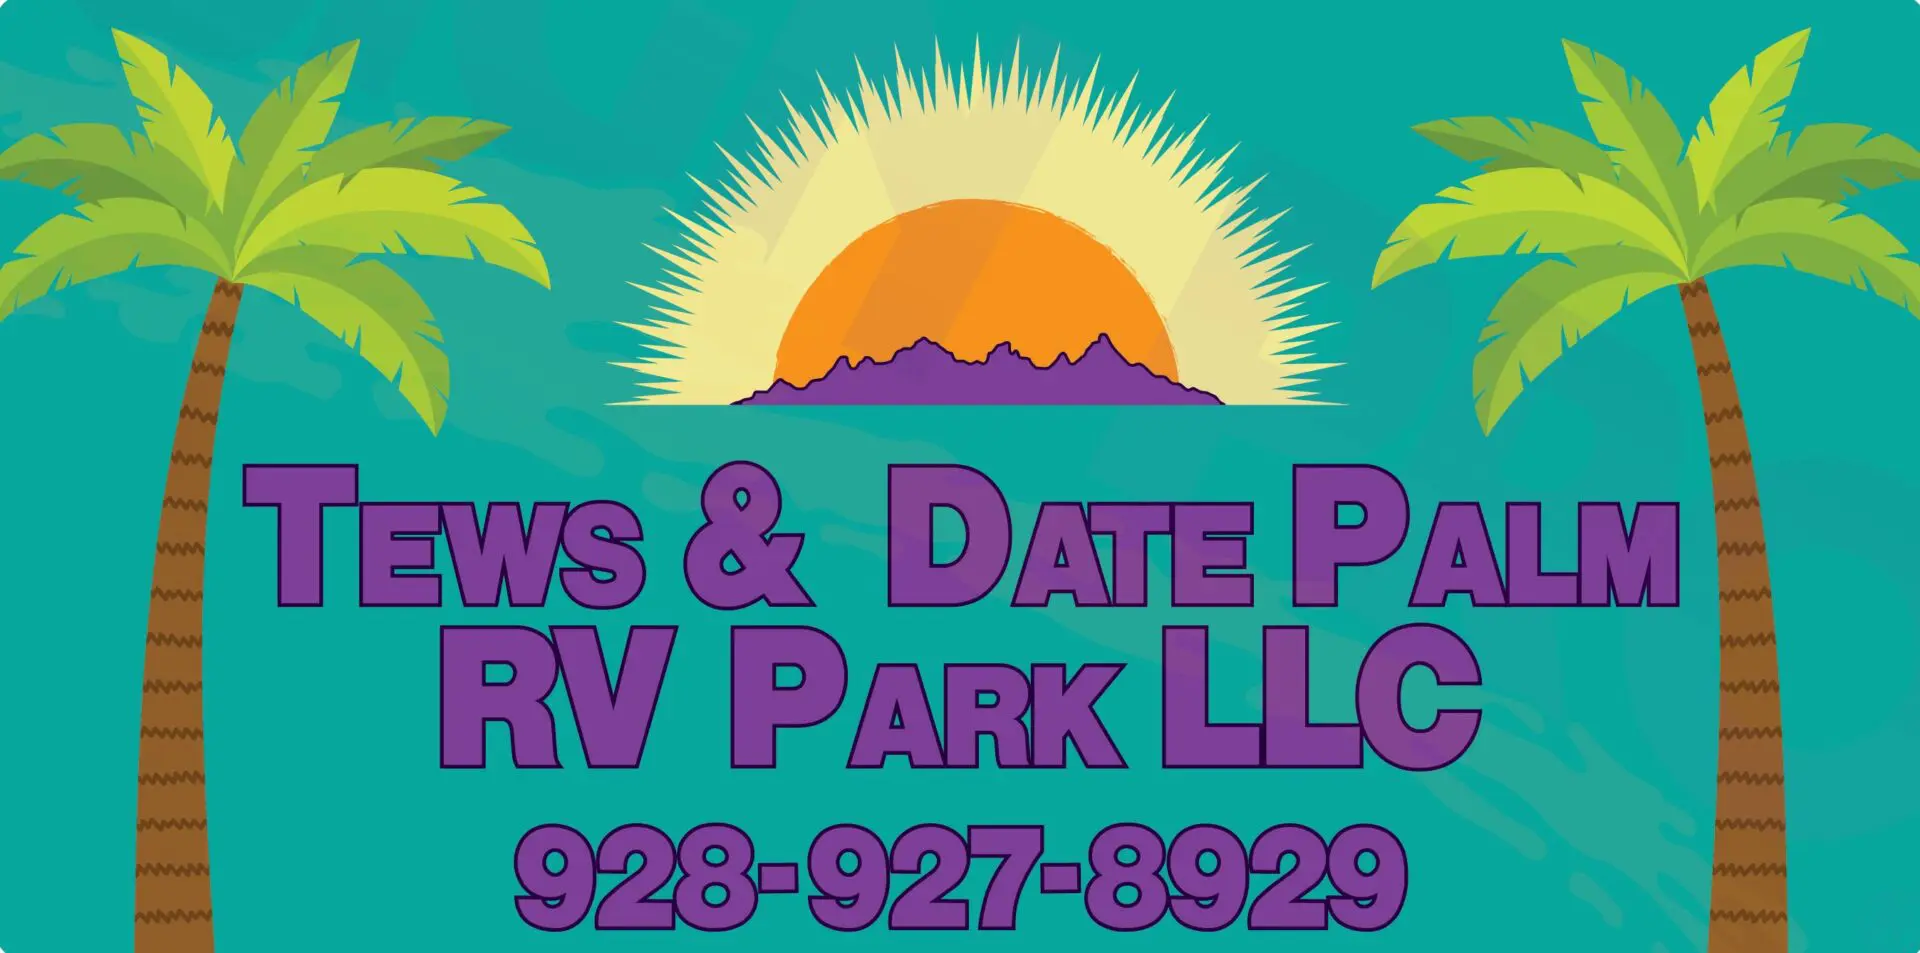 Illustration of two palm trees flanking a setting sun above mountains with text reading “Tews & Date Palm RV Park LLC, 928-927-8929.”.